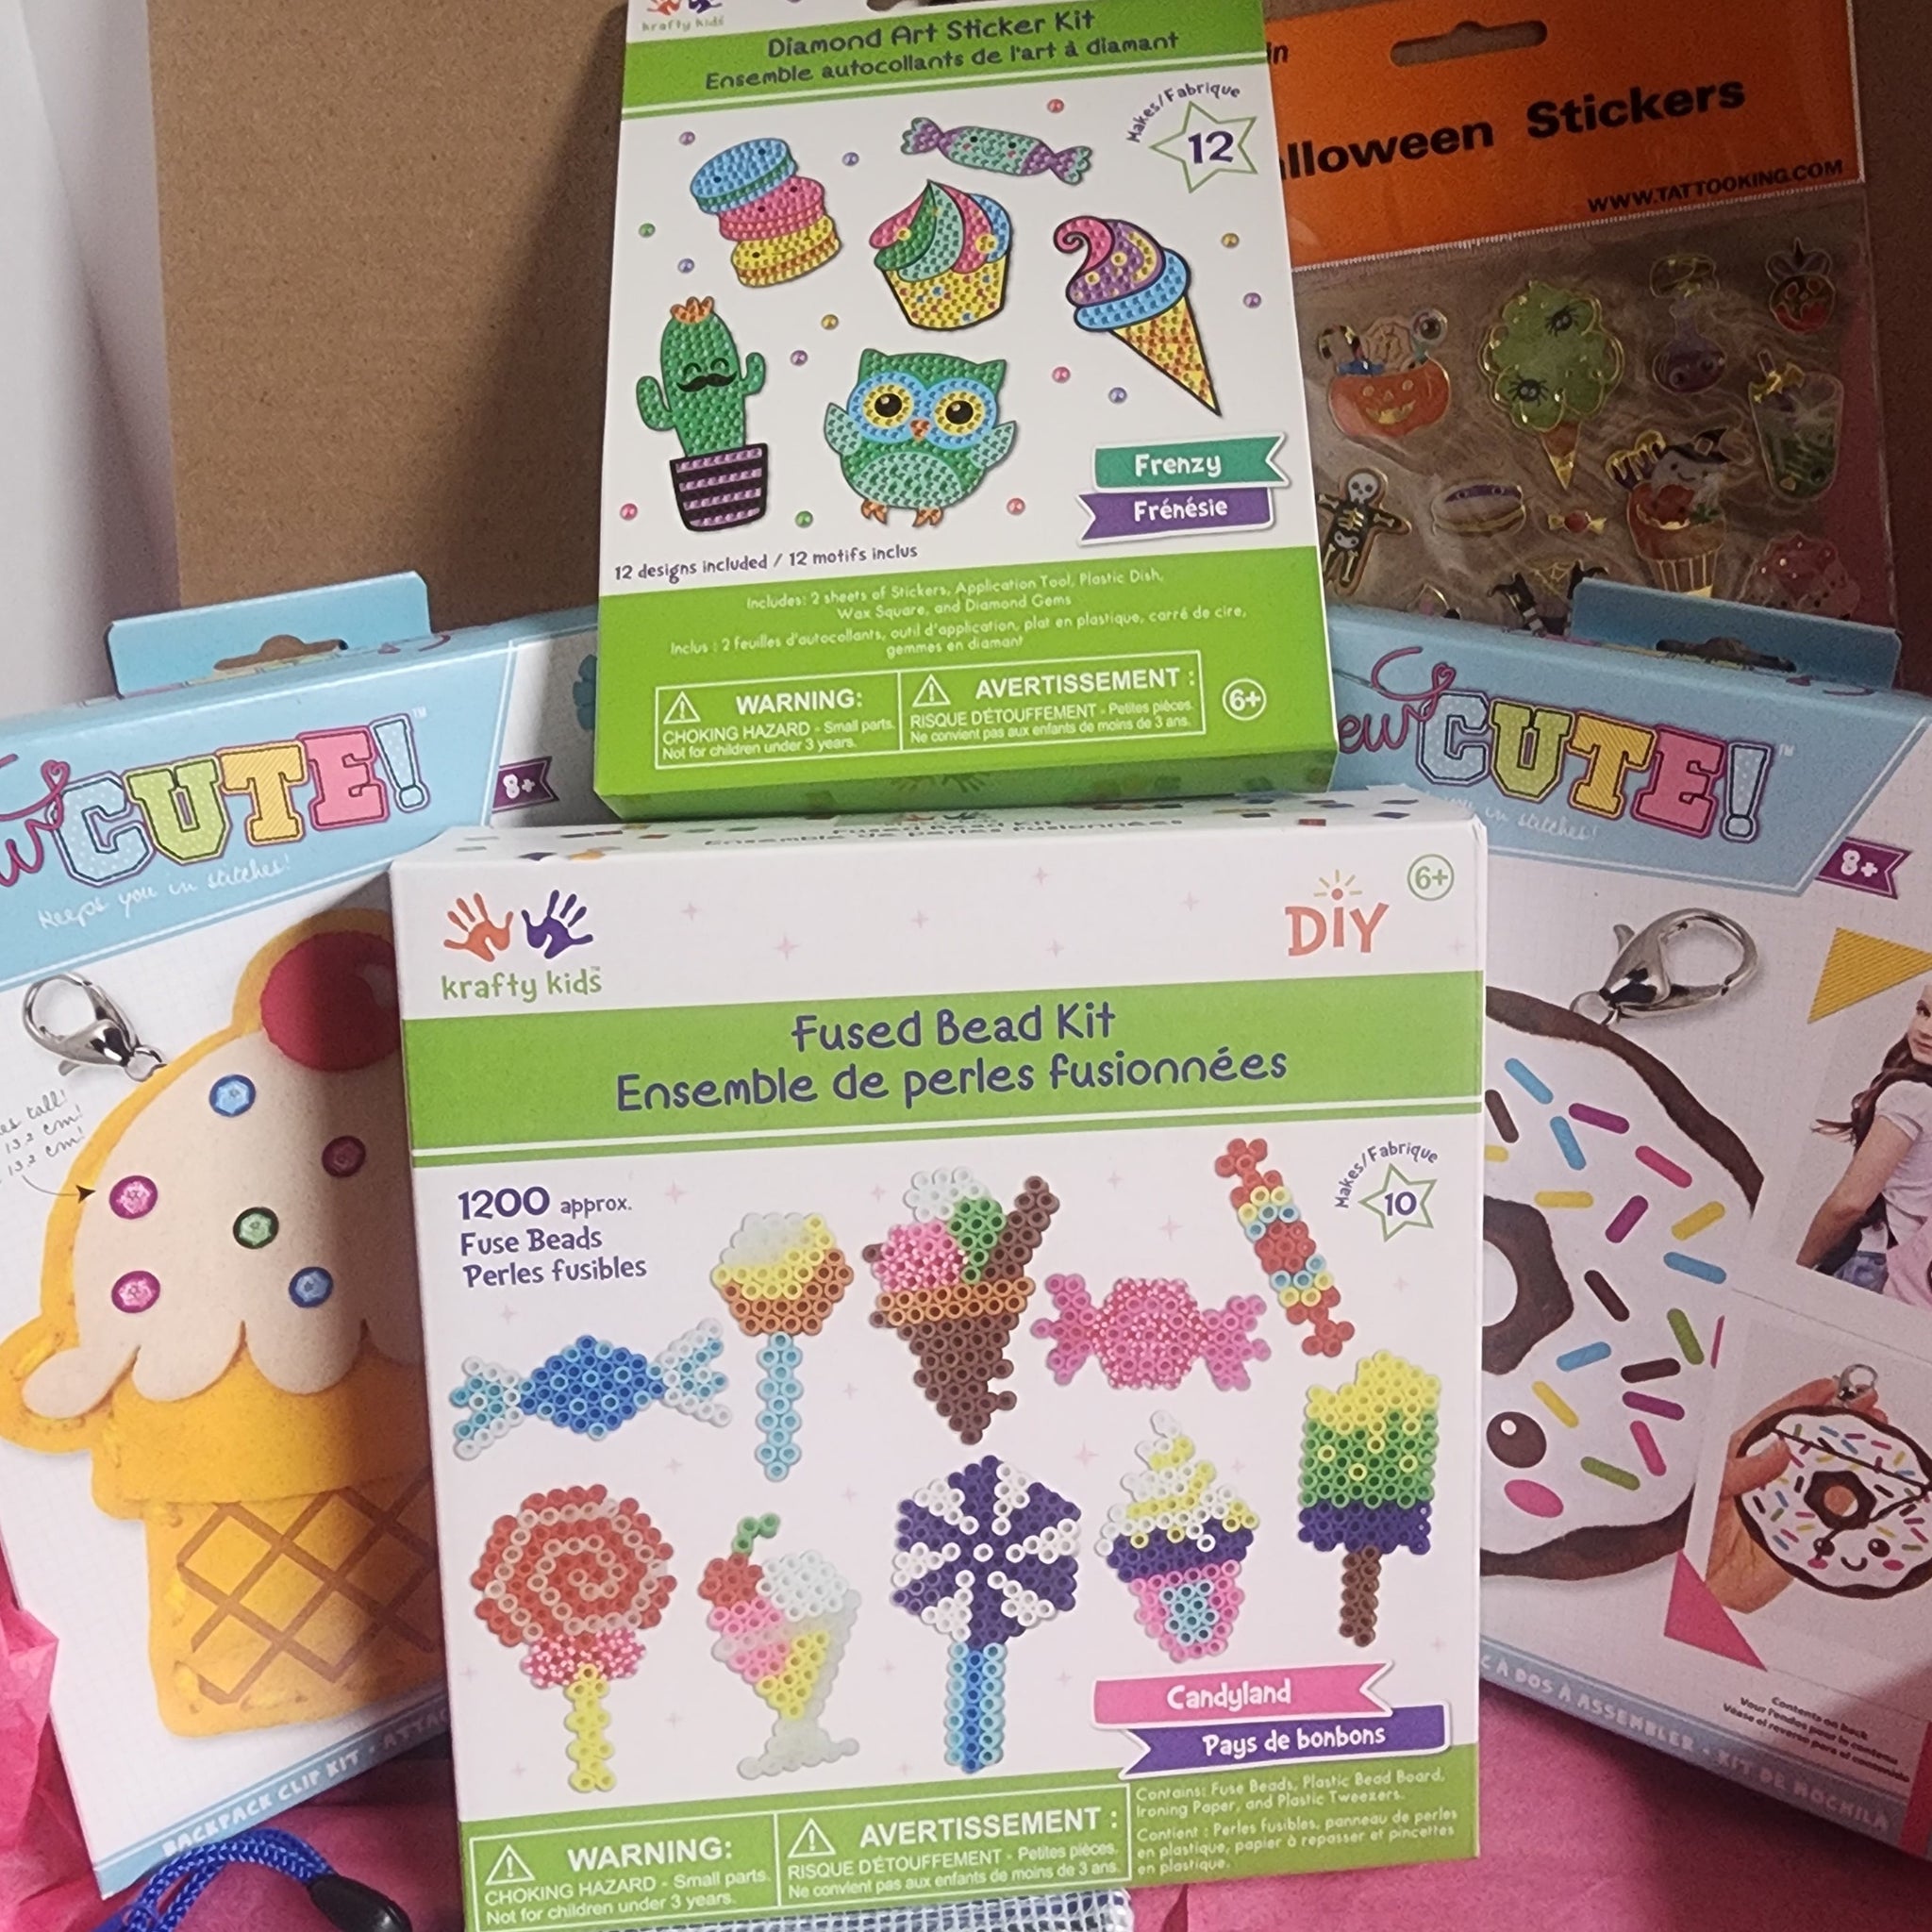 Craft 'n Stitch Winter Animals Crafts Gift Box for Kids Ages 7-9 – Craft  and Treasure Cove